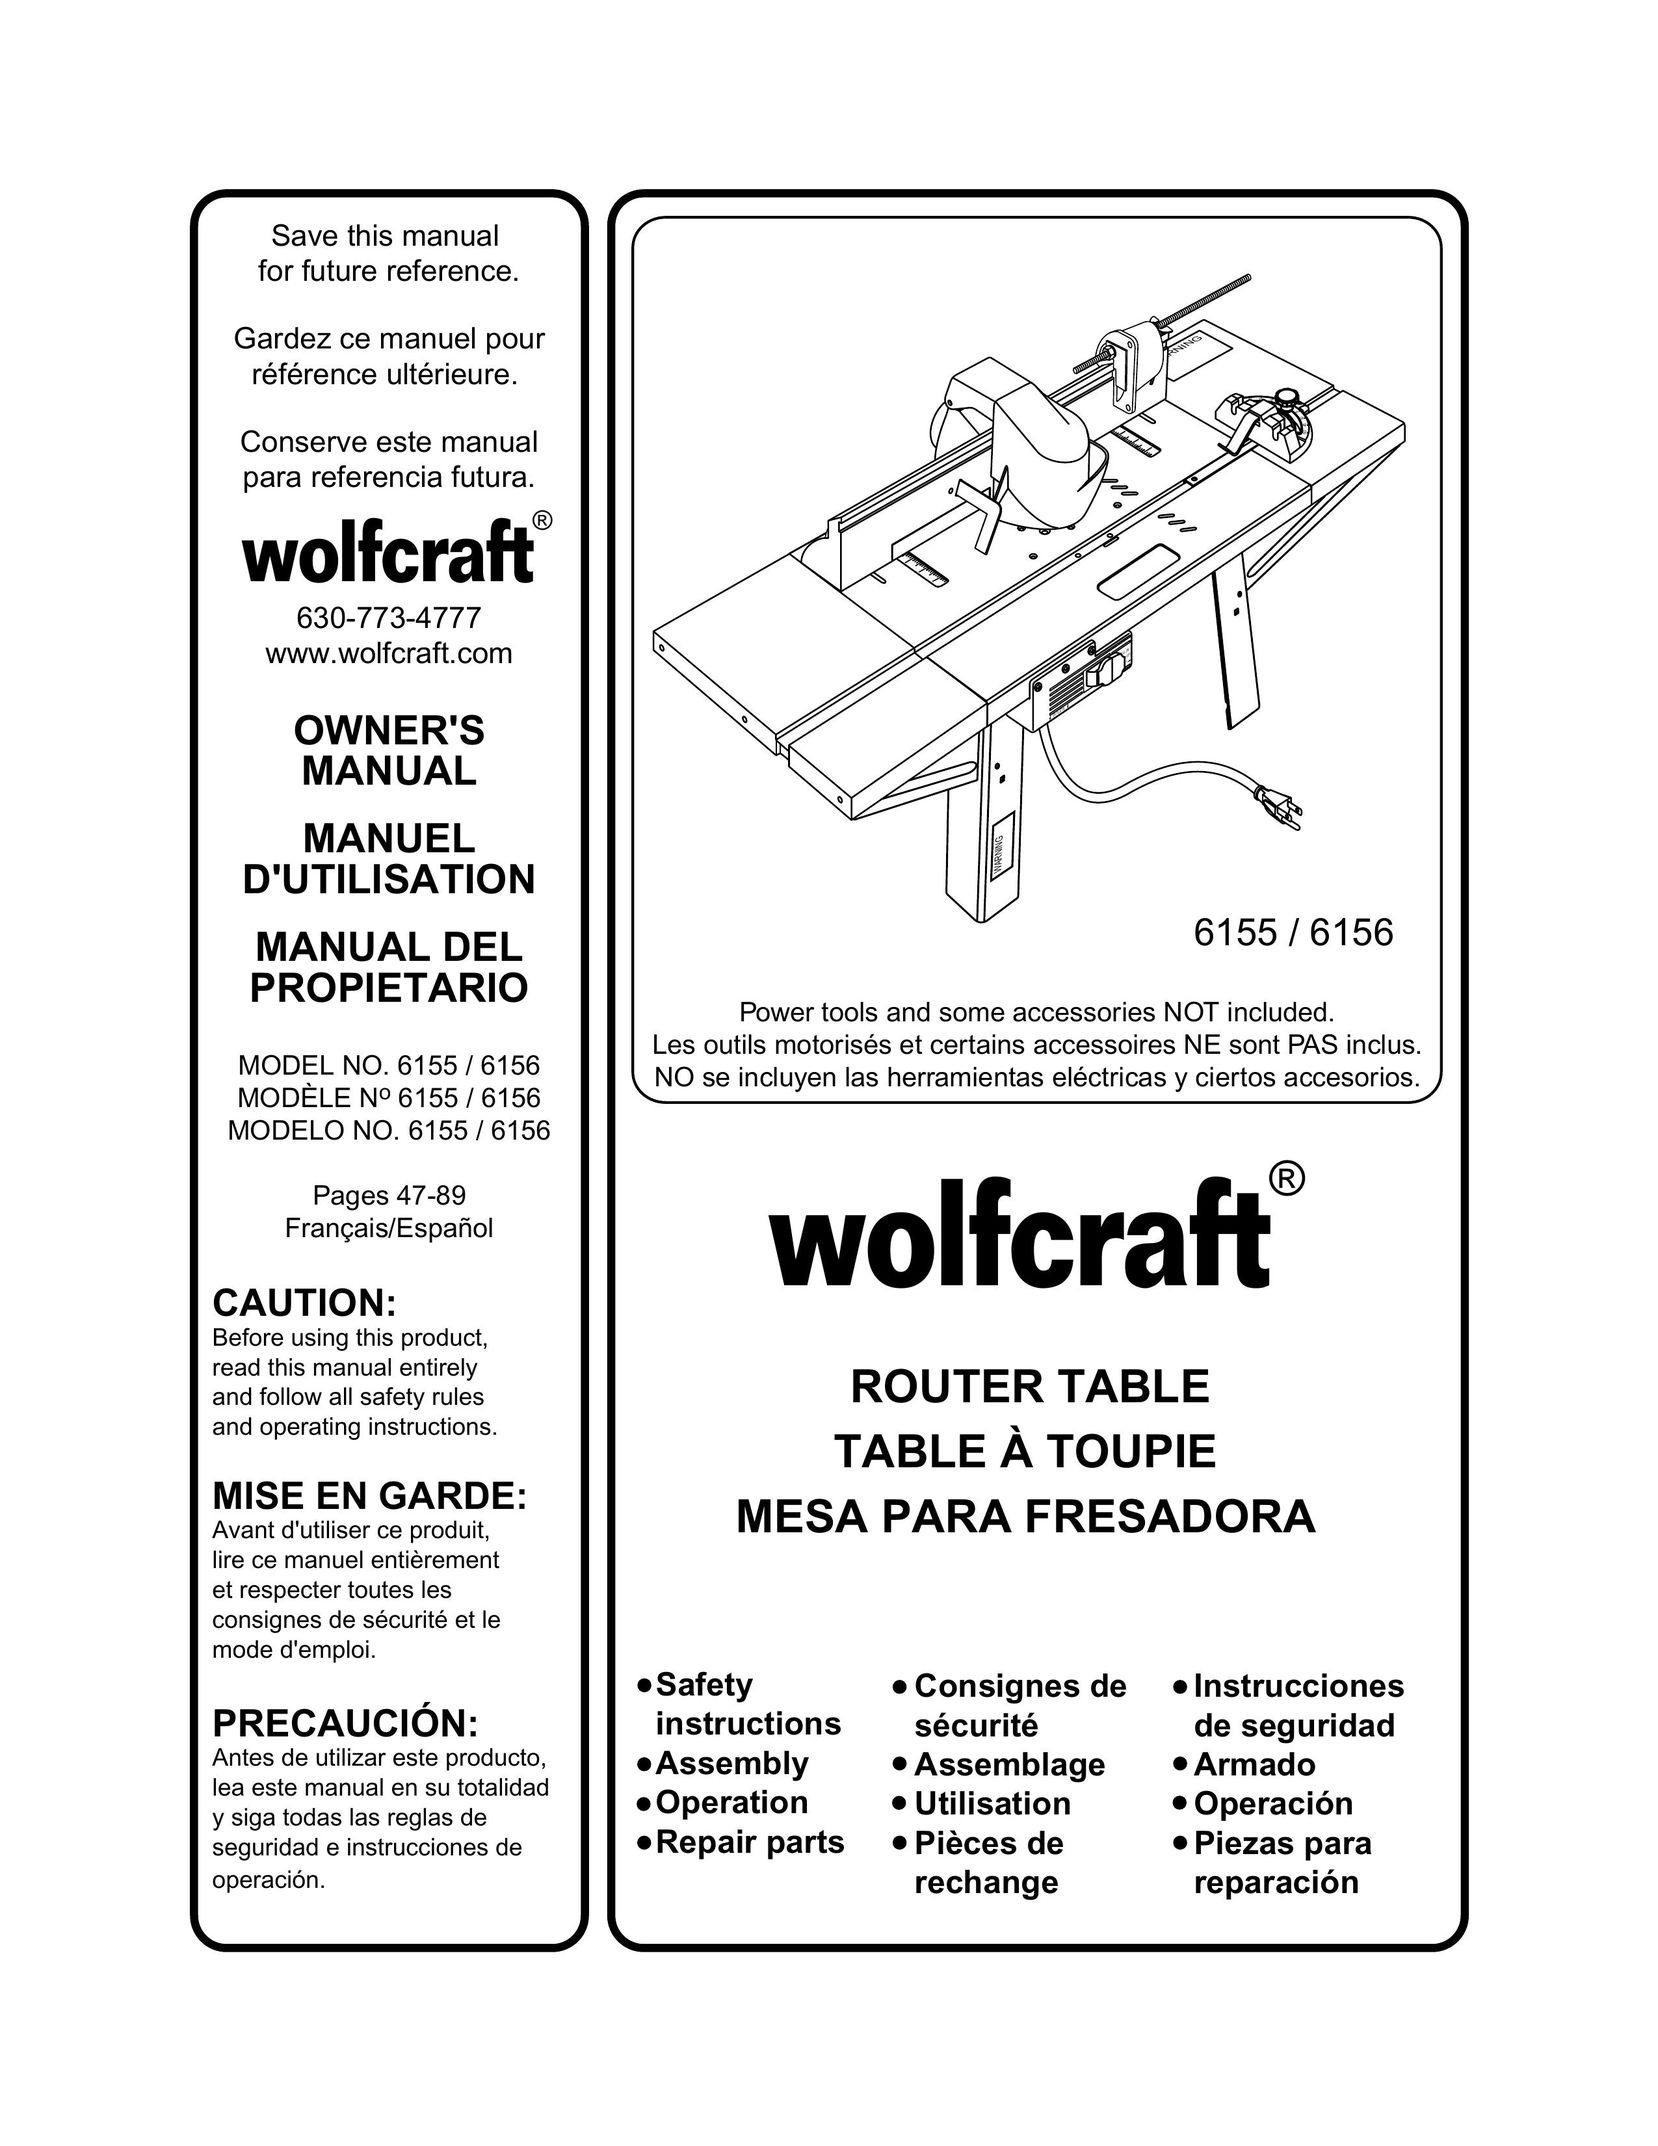 Wolfcraft 6156 Router User Manual